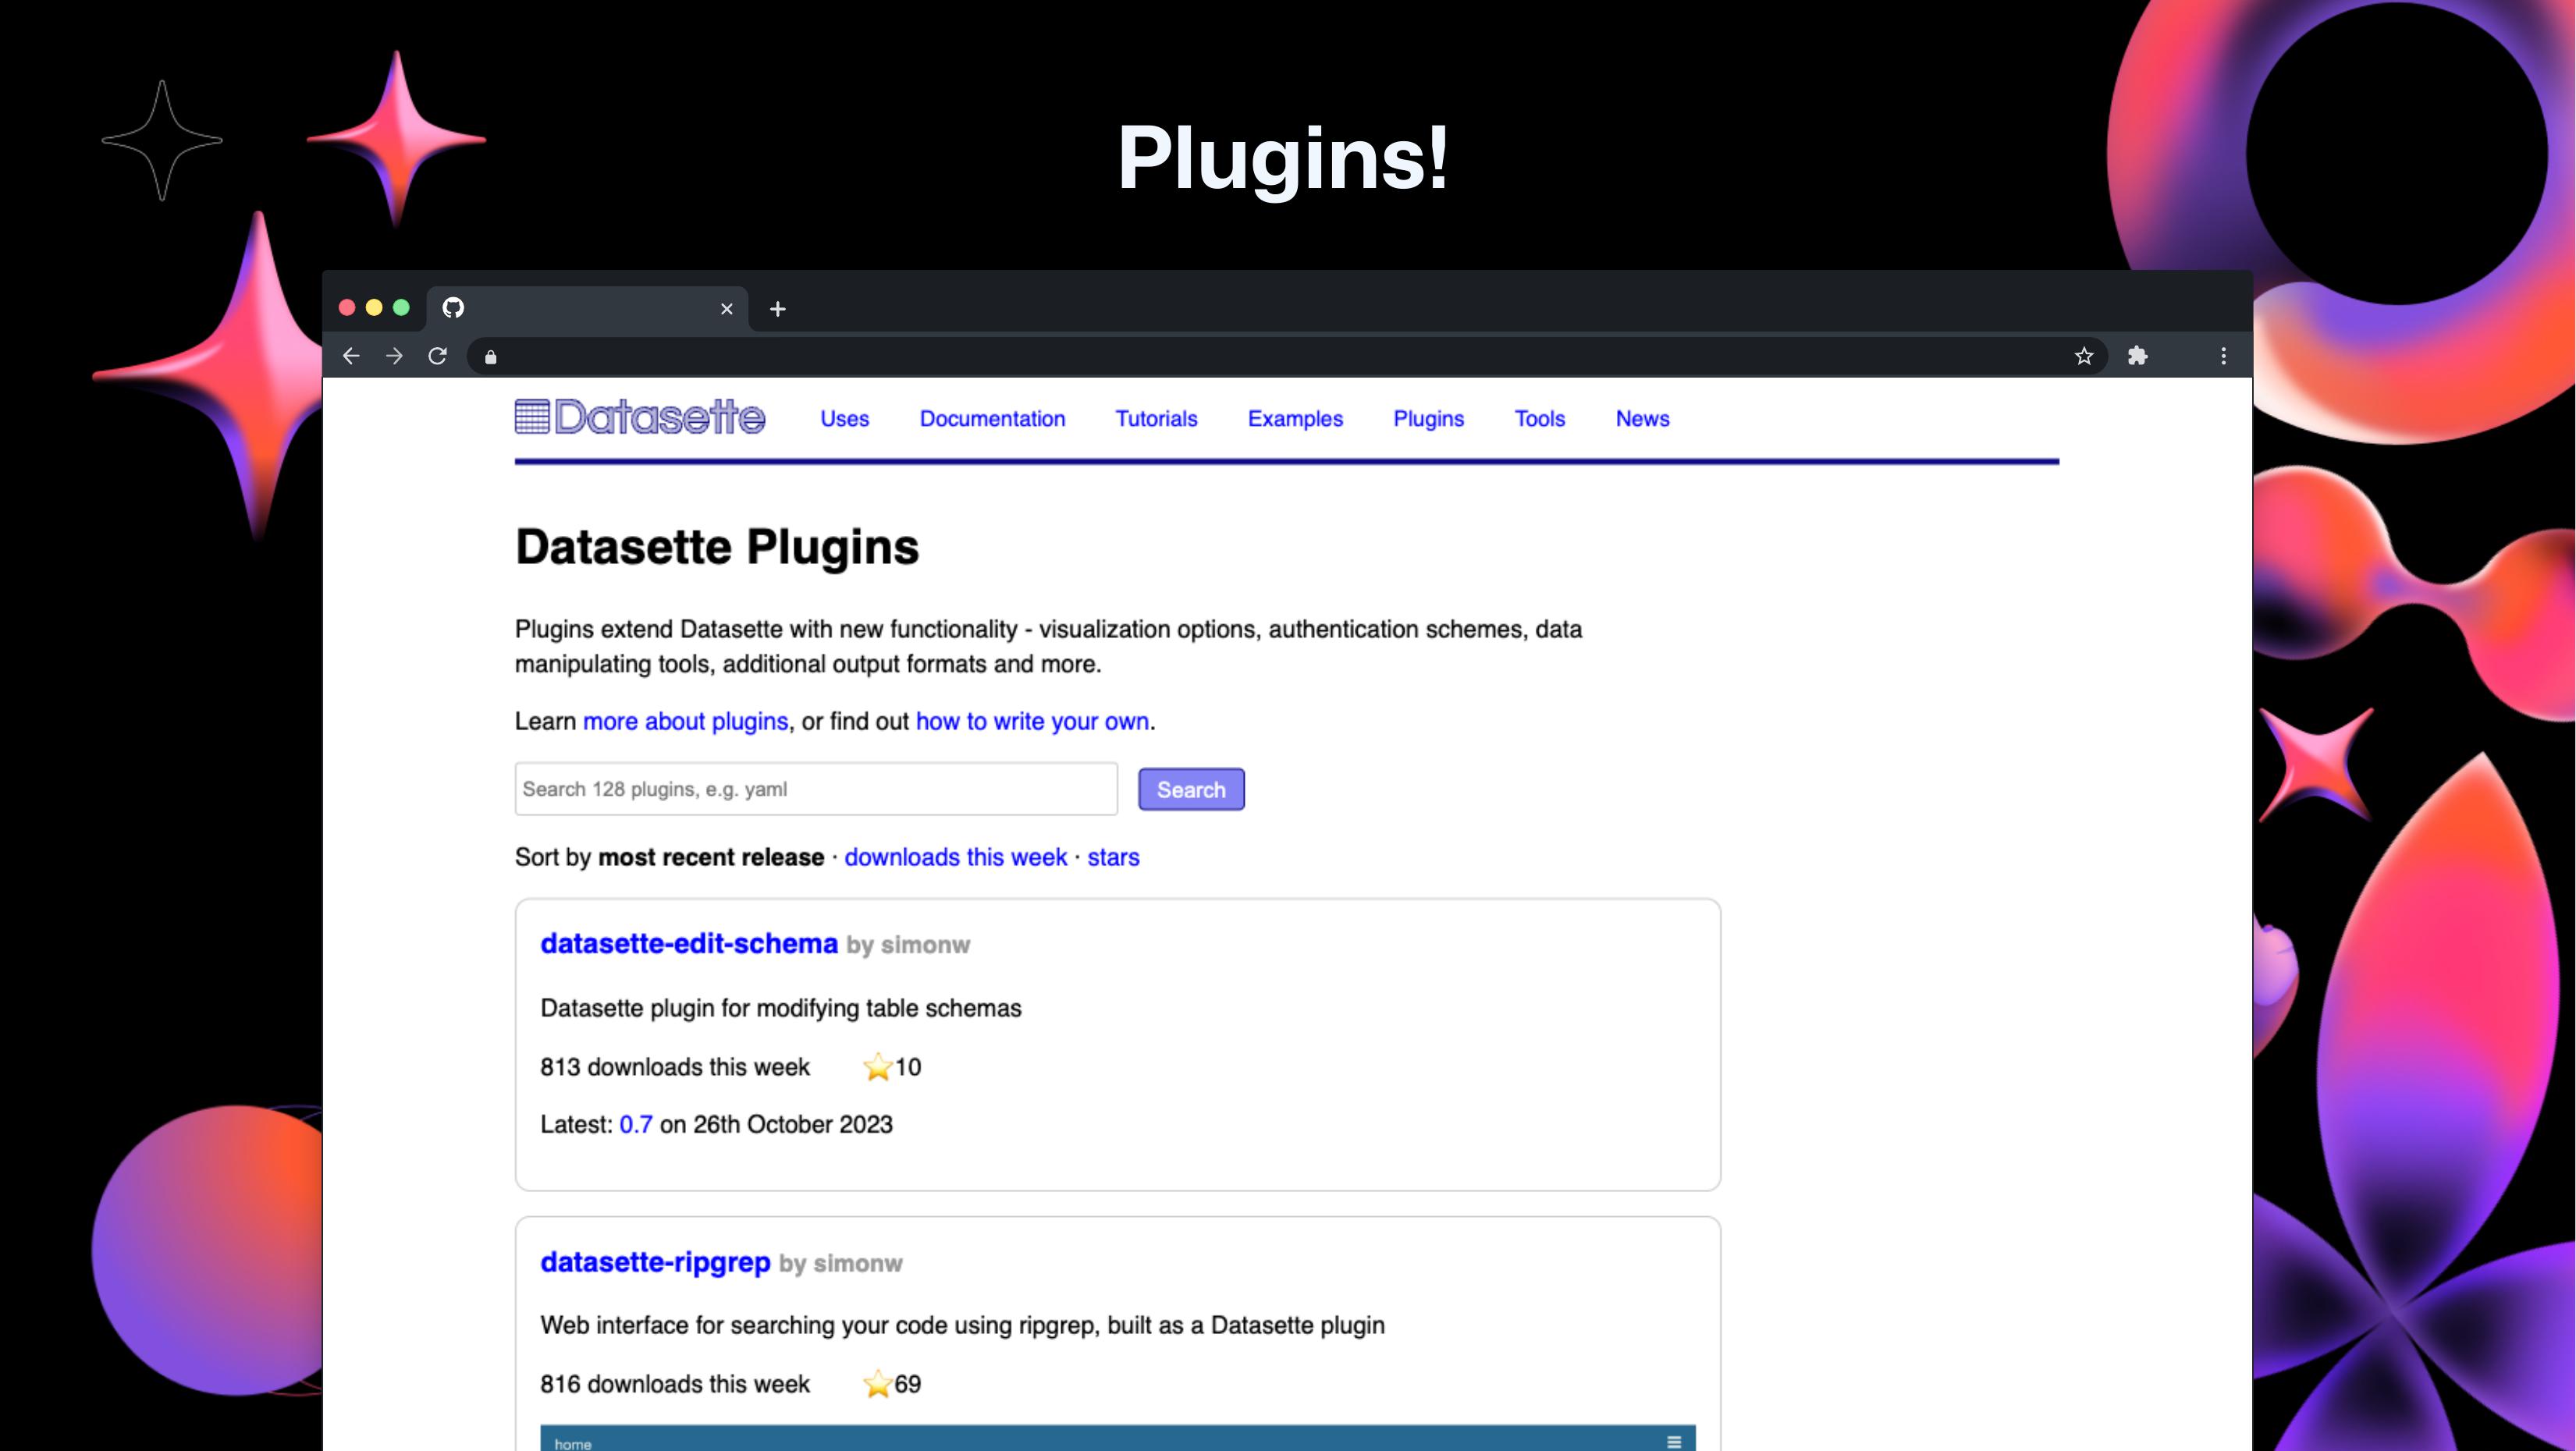 Plugins!  The Datasette Plugins directory, listing 128 different plugins. The two at the top of the page are datasette-edit-schema and datasette-ripgrep.